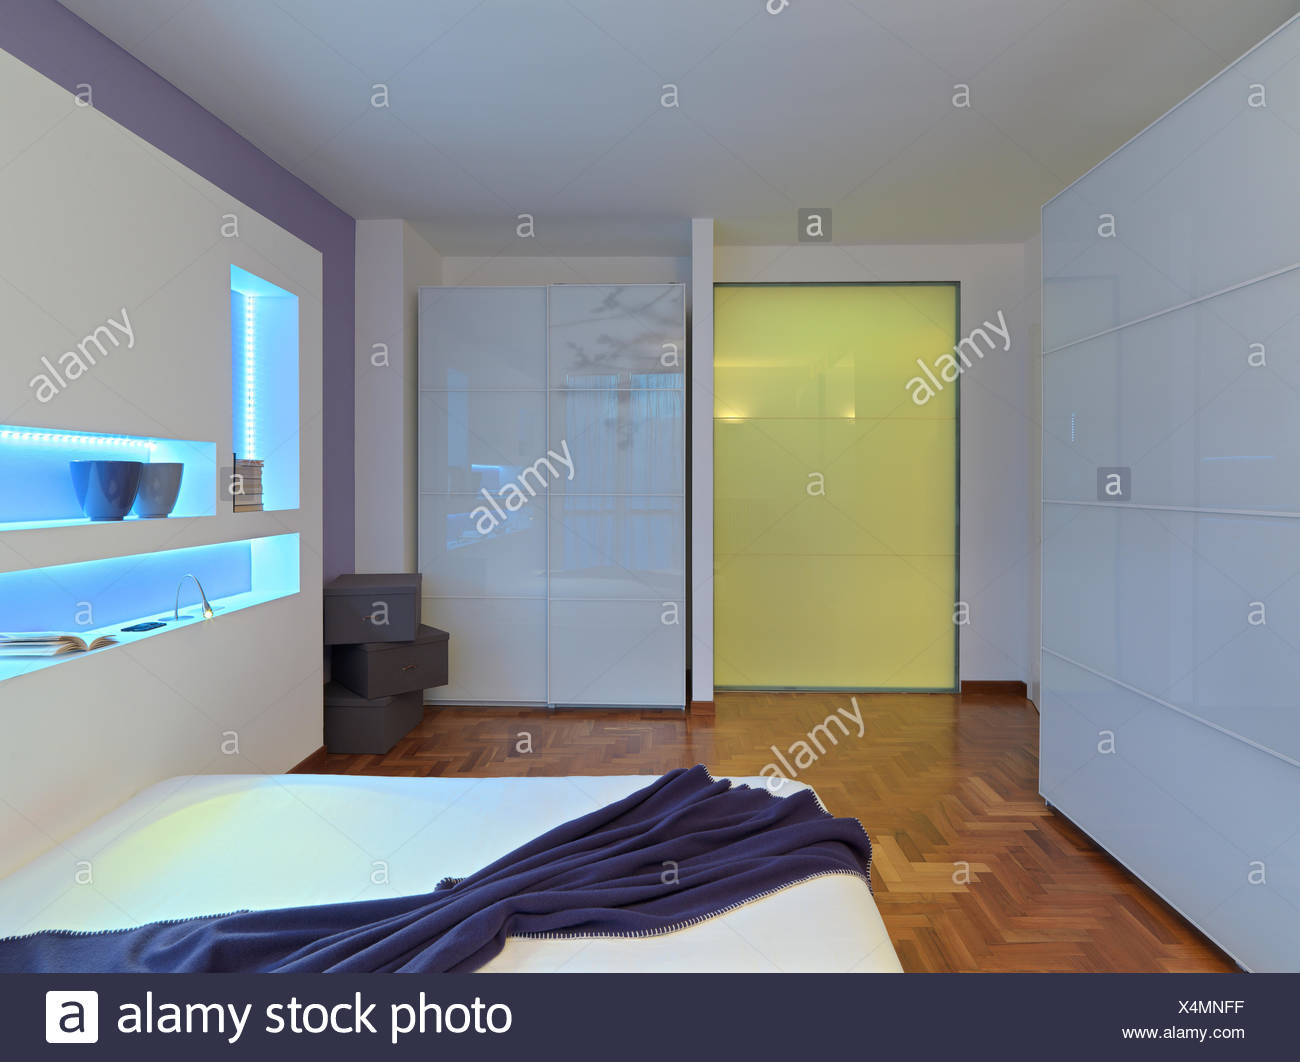 Interior View Of A Modern Bedroom With Glass Wardrobe And